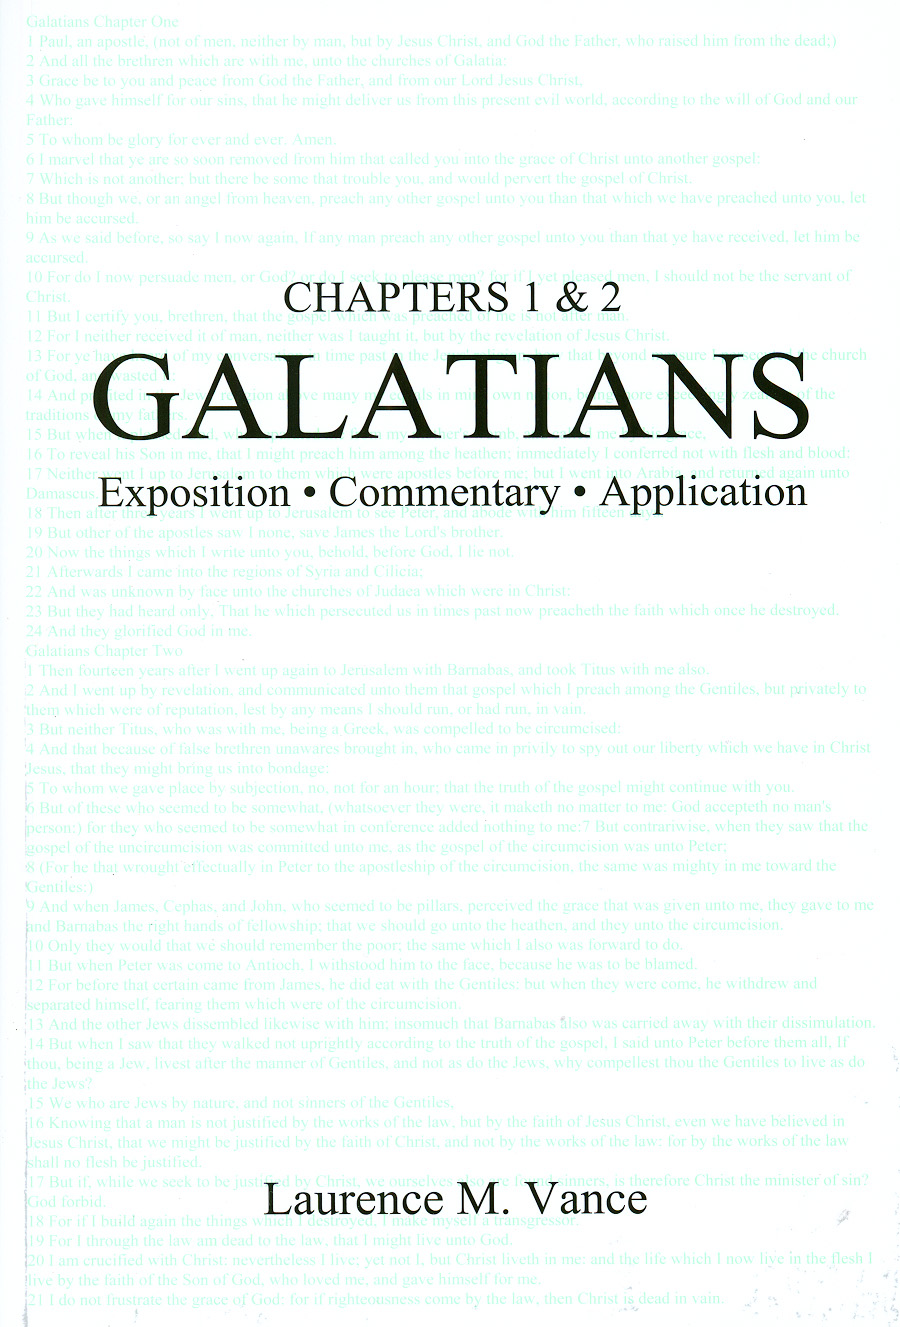 Galatians 1 & 2: Exposition, Commentary, Application, 168 pages, paperback, $5.95